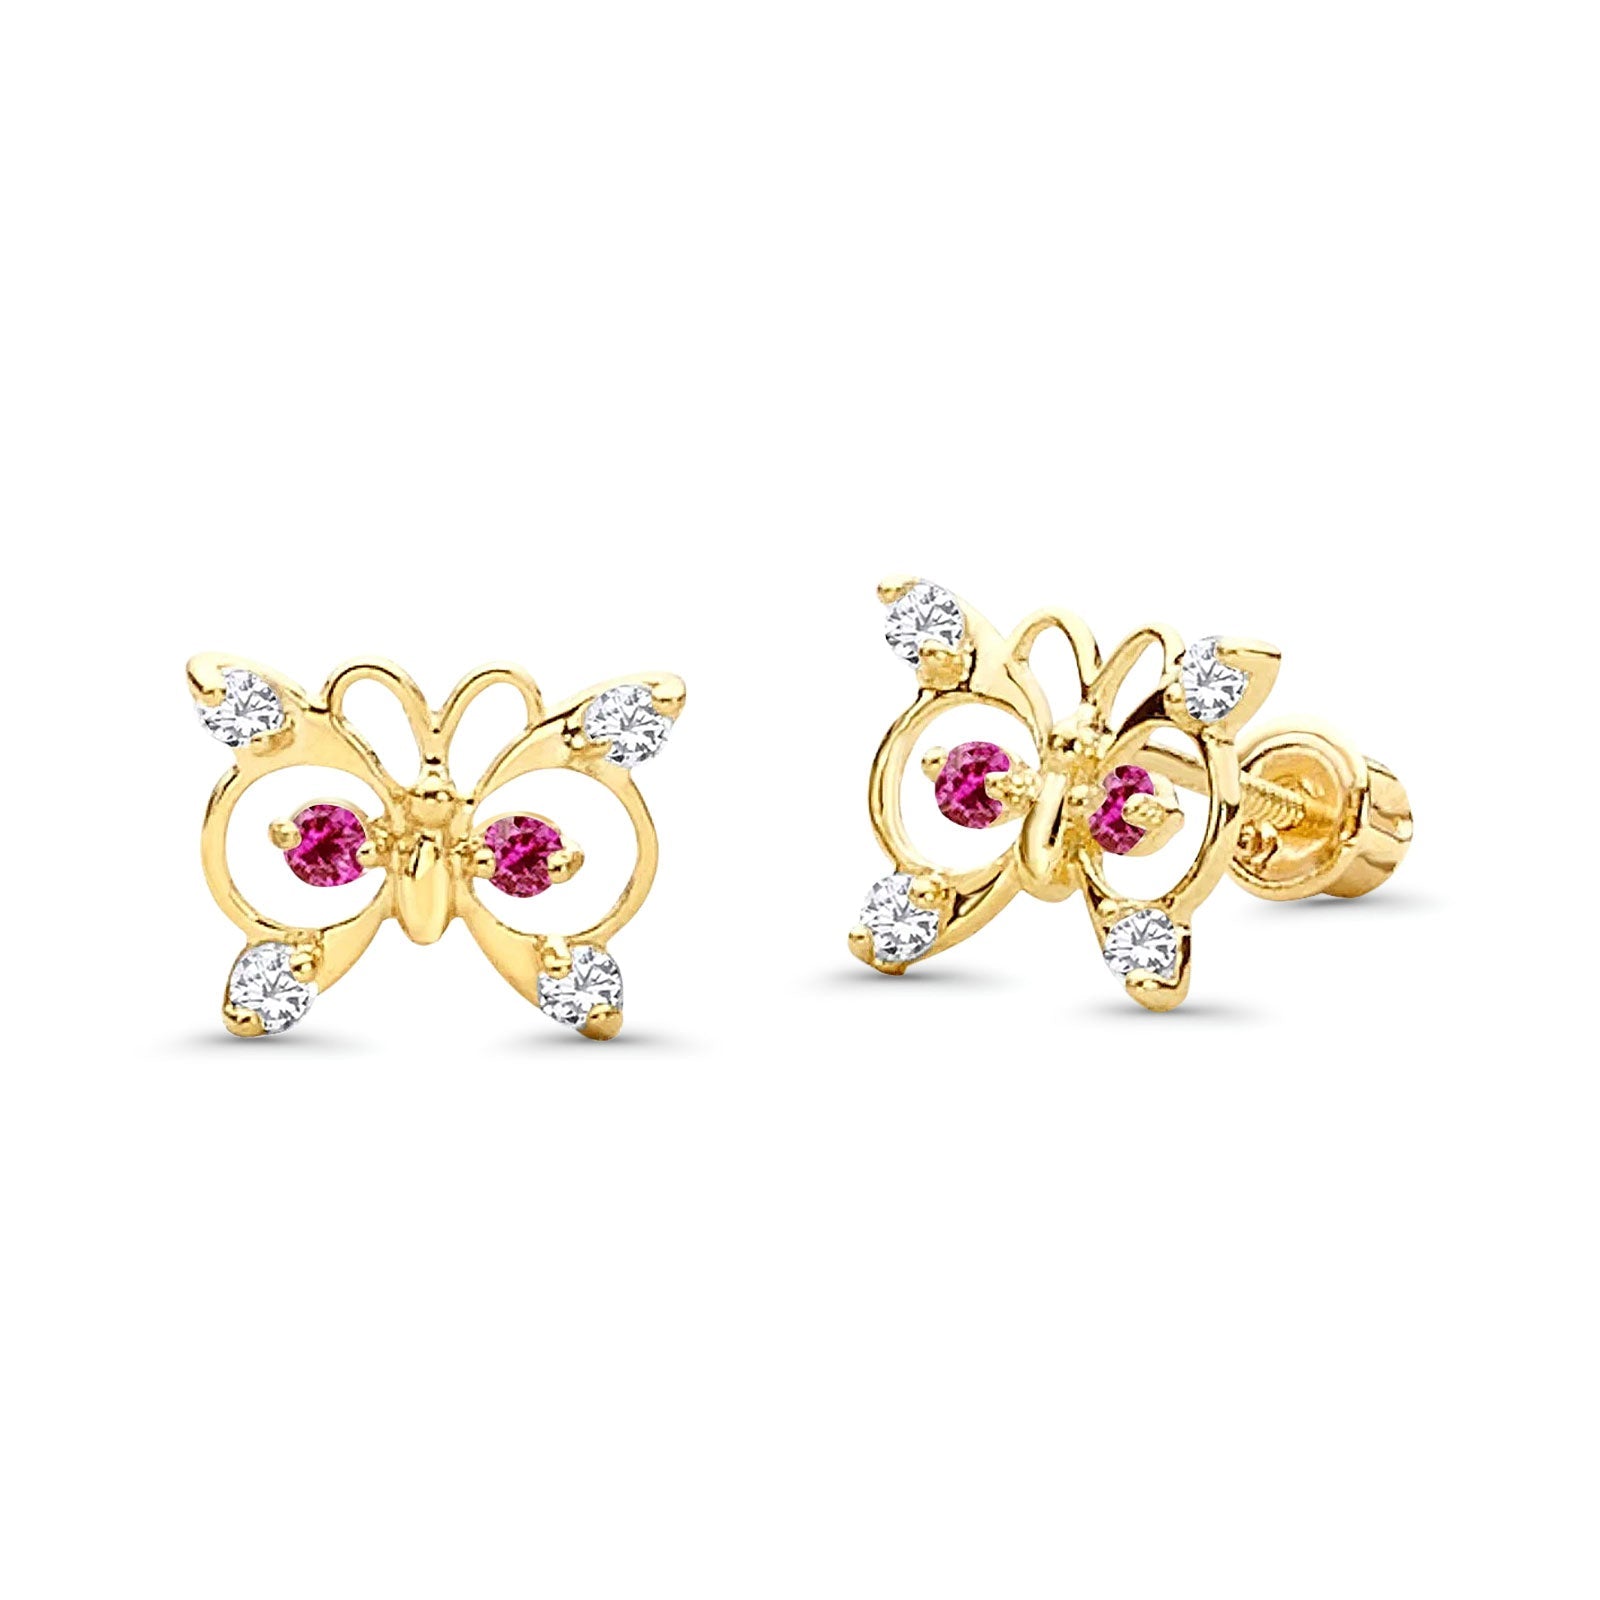 14K Yellow Gold Butterfly Stud Earrings with Screw Back - 2 Different Size Available, Best Birthday Gift for Her